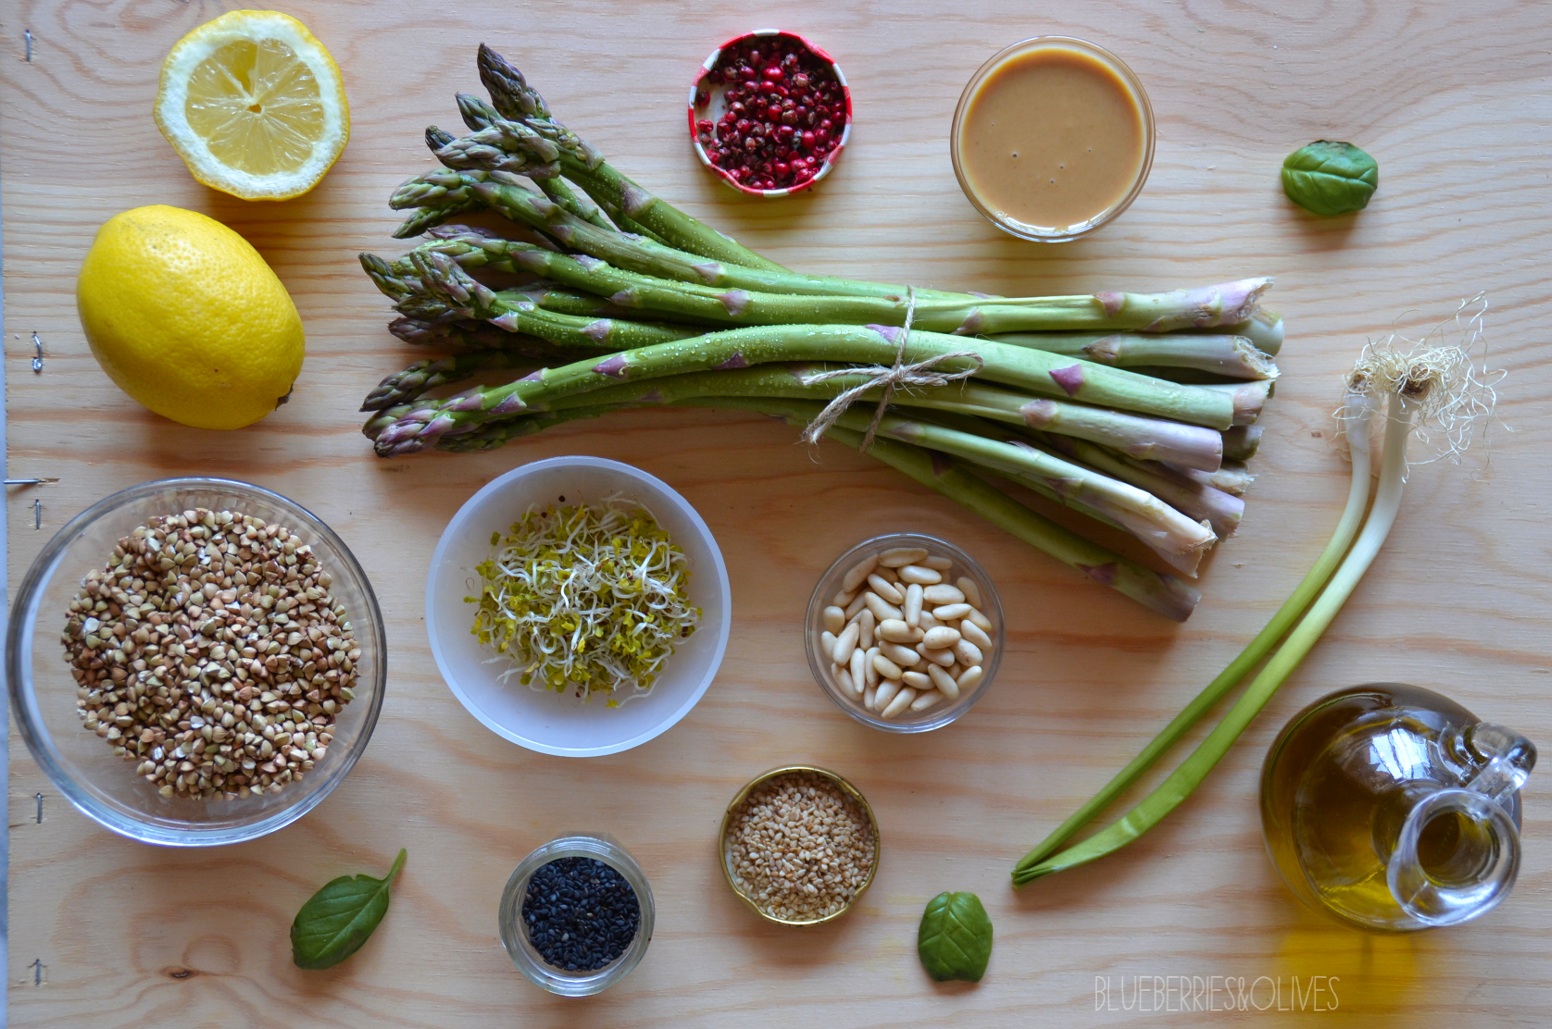 INGREDIENTS - BUCKWHEAT AND ASPARAGUS SALAD WITH TAHINI DRESSING